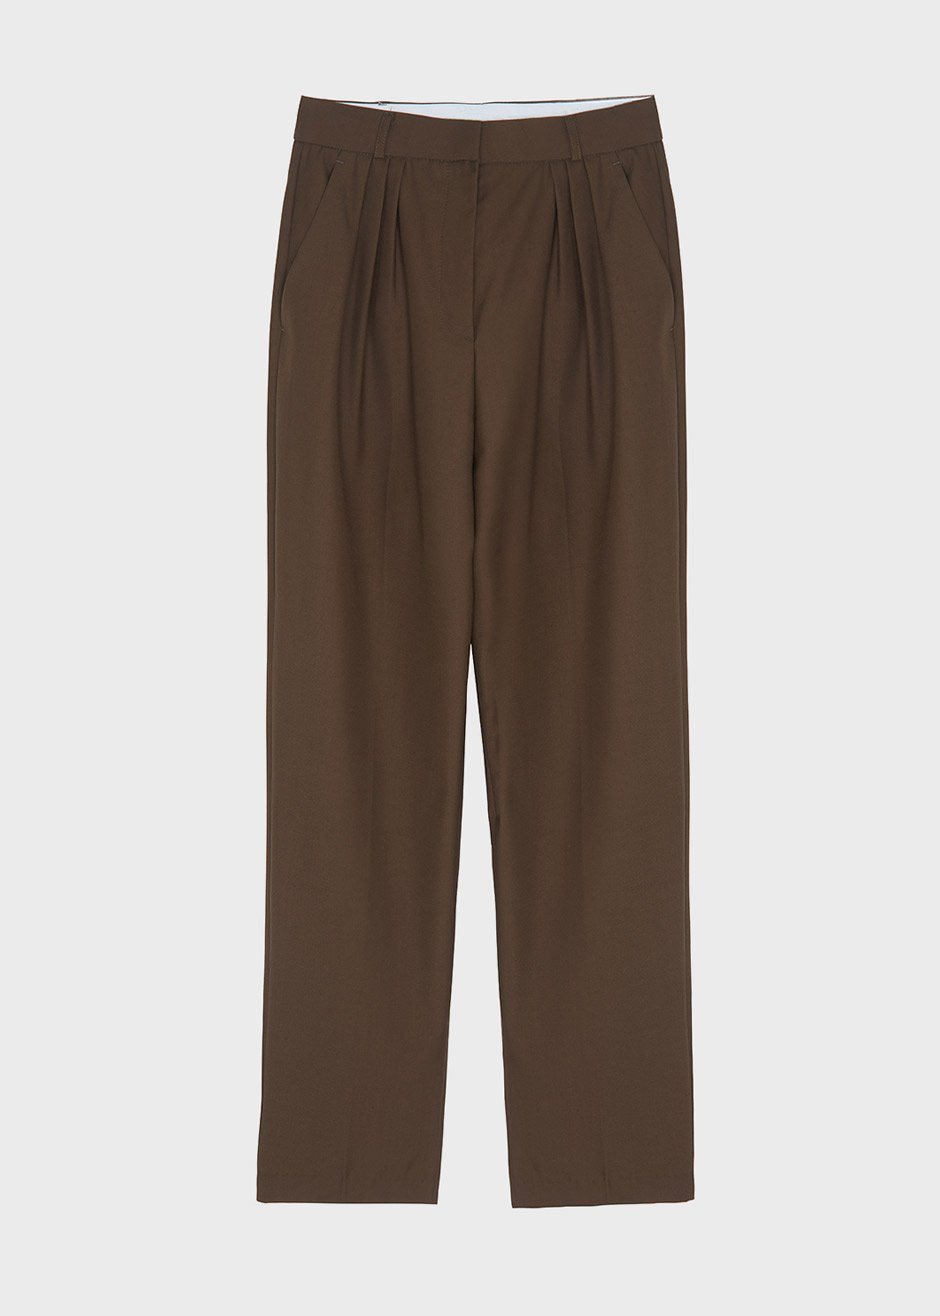 Straight Leg Pleat Front Trousers in Dark Chocolate – The Frankie Shop